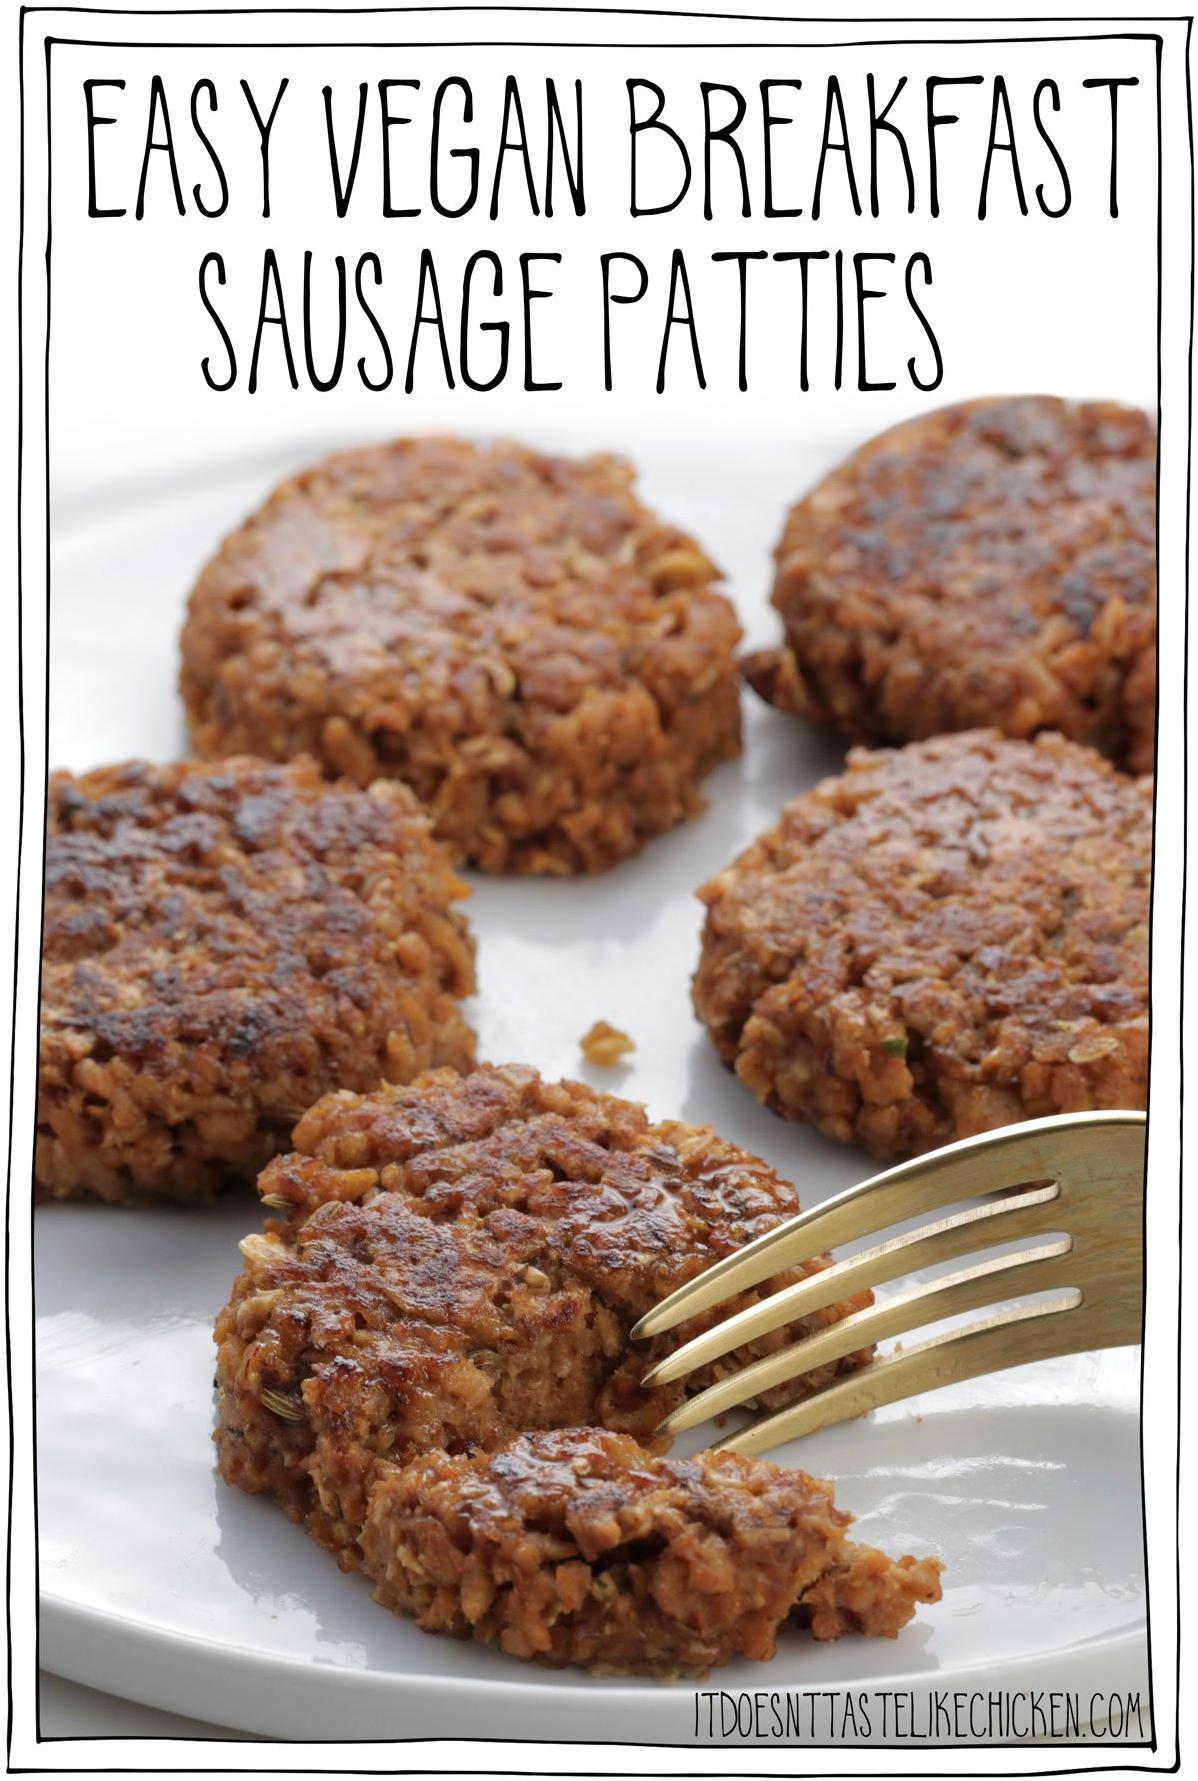  Crispy on the outside, juicy on the inside - these vegetable-based patties are a game-changer.